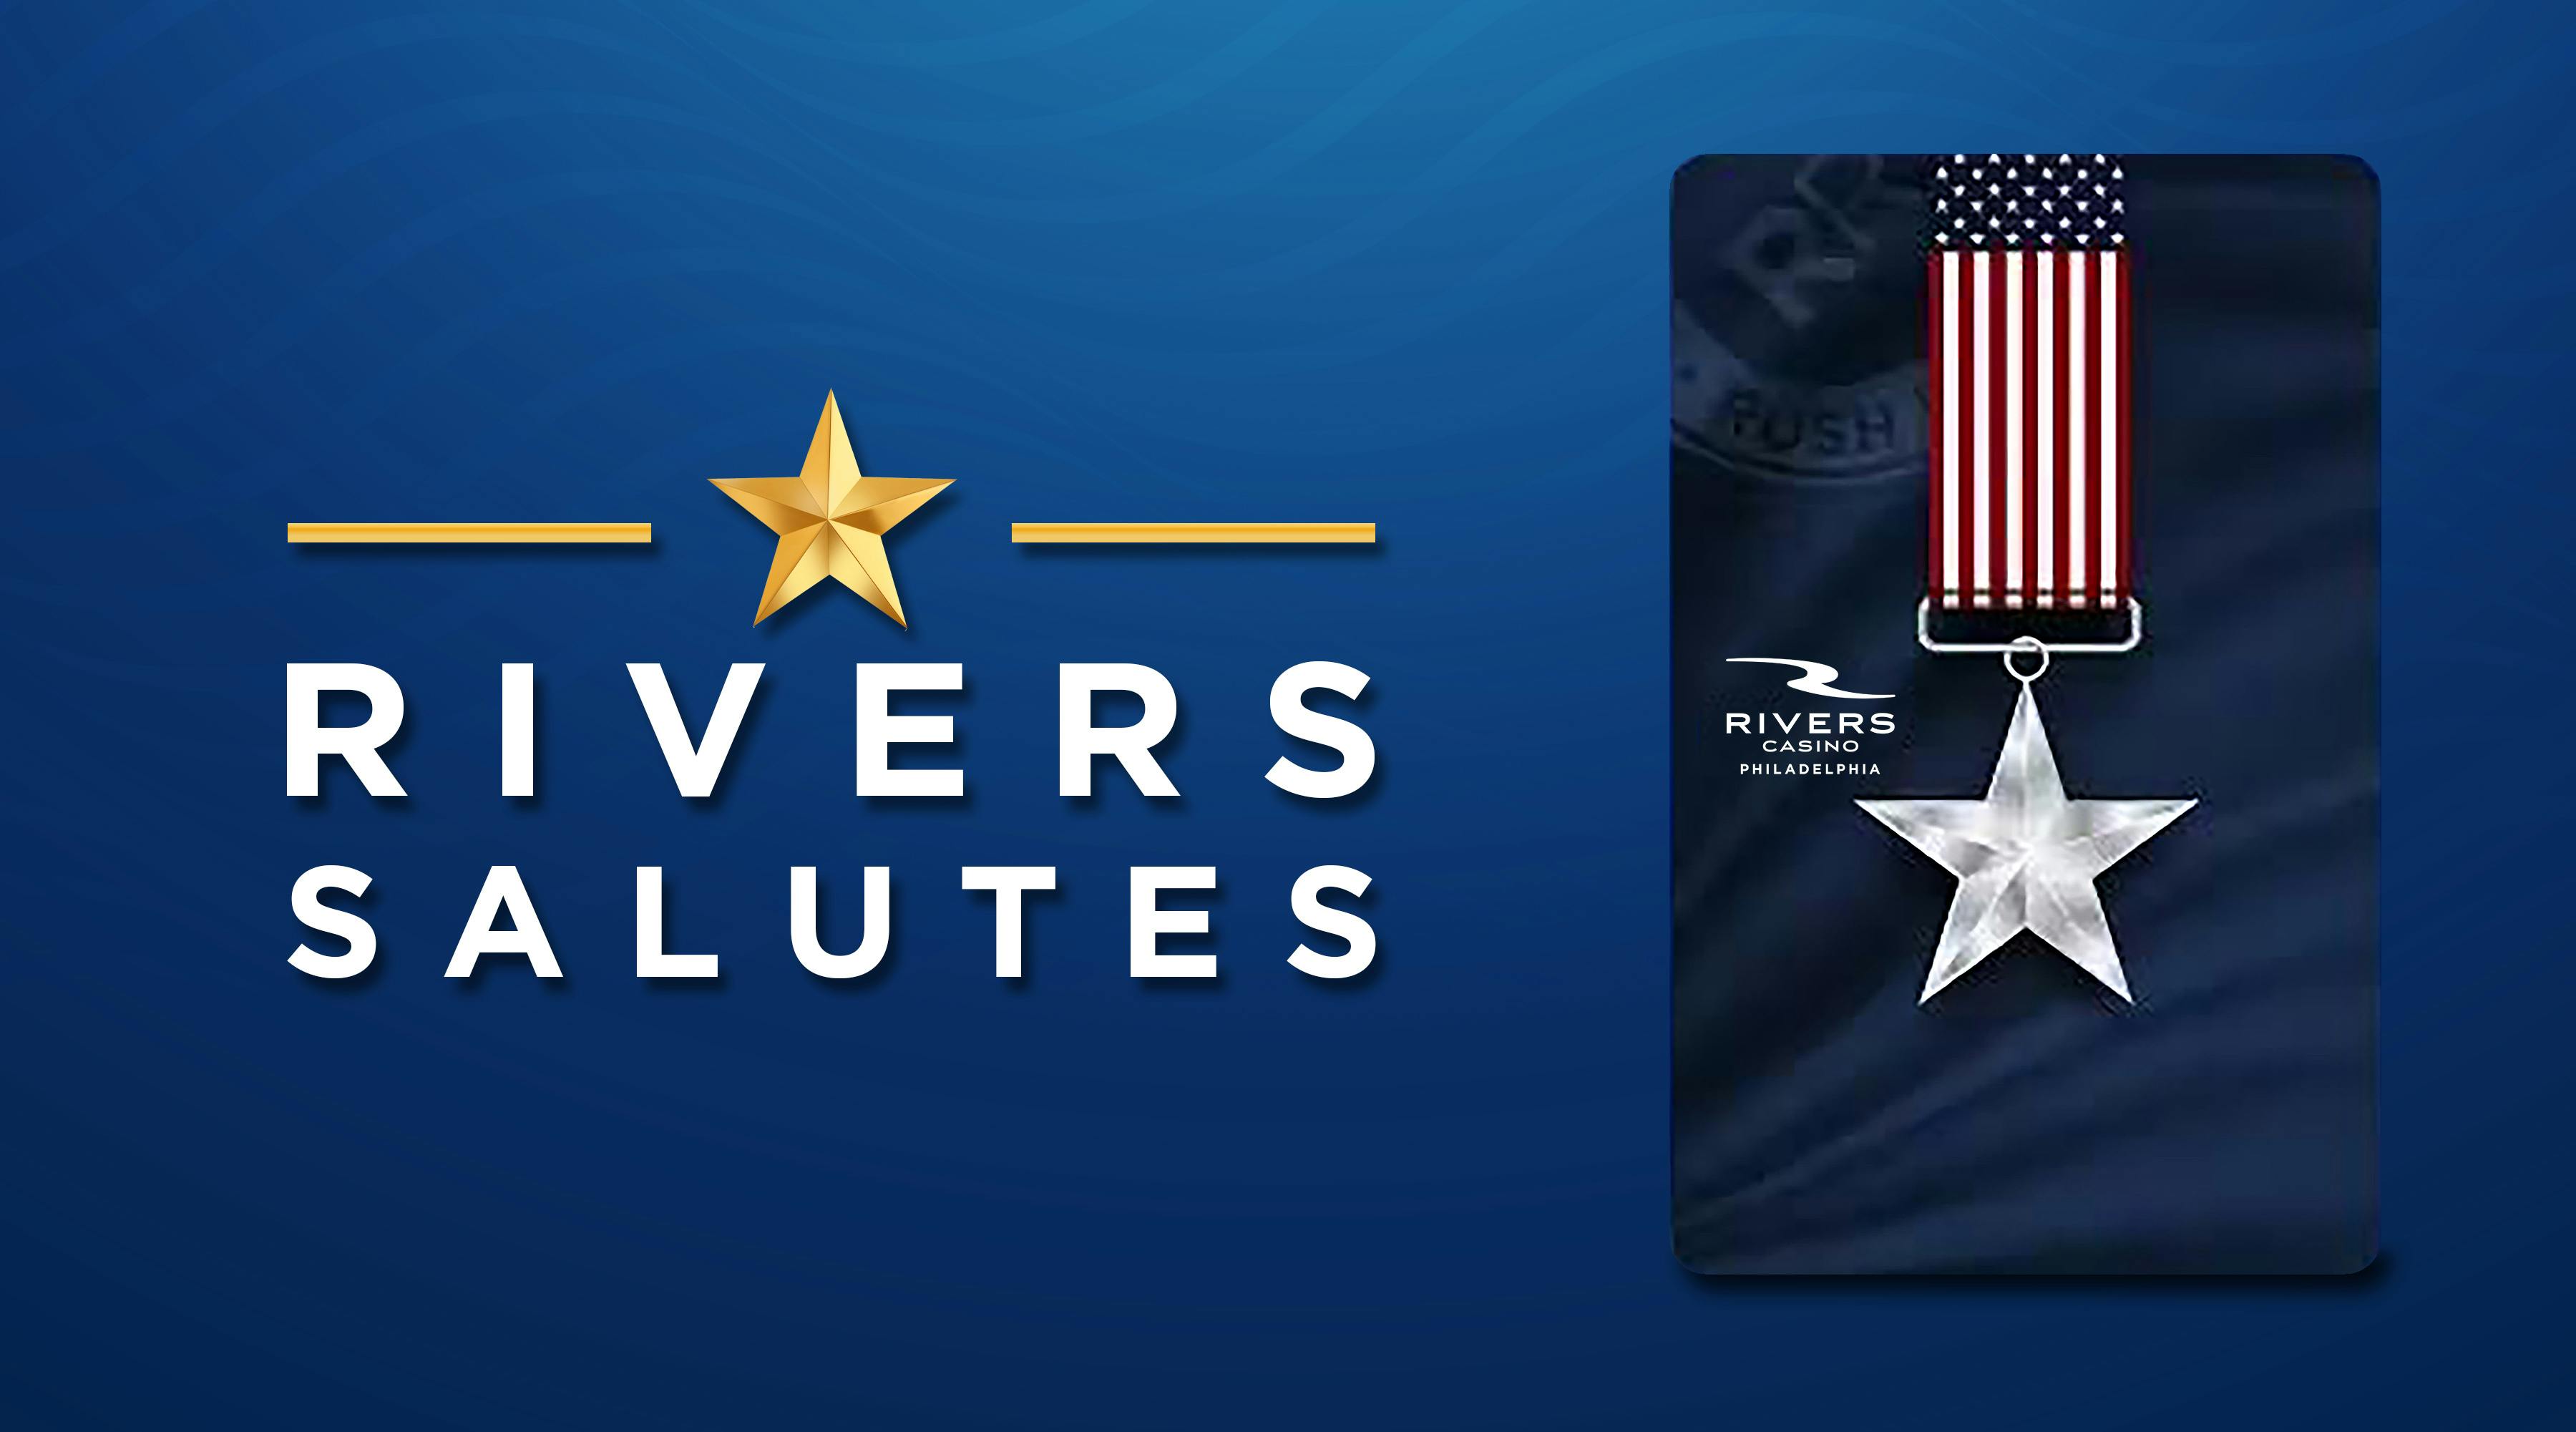 Rivers Casino Philadelphia Launches ‘Rivers Salutes’ Program To Honor Vets And Current Military Members On Veterans Day